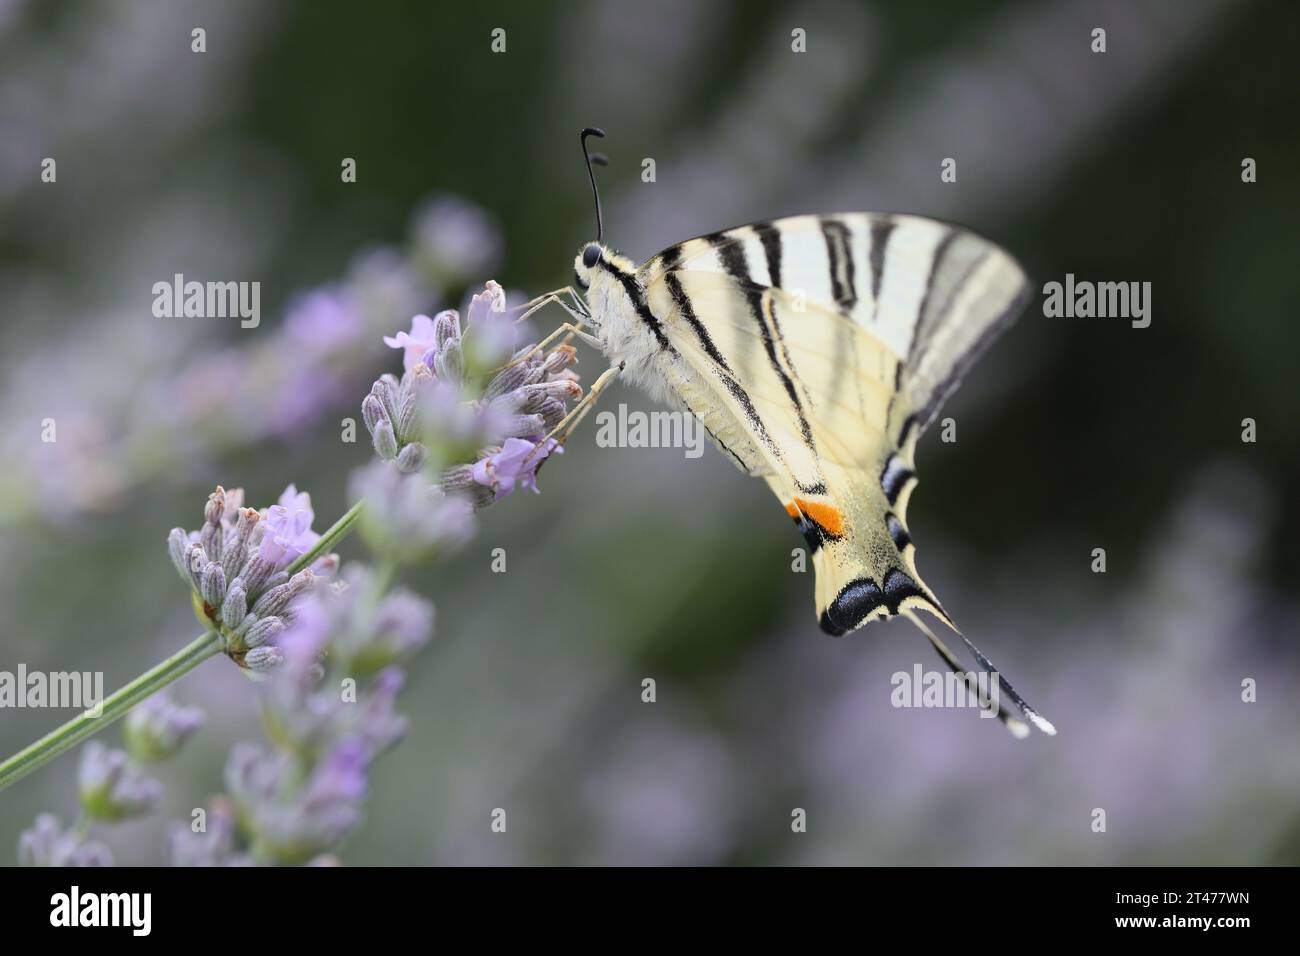 Scarce swallowtail (Iphiclides podalirius) feeding on flowers in a garden. Photographed in Tuscany, Italy. Stock Photo